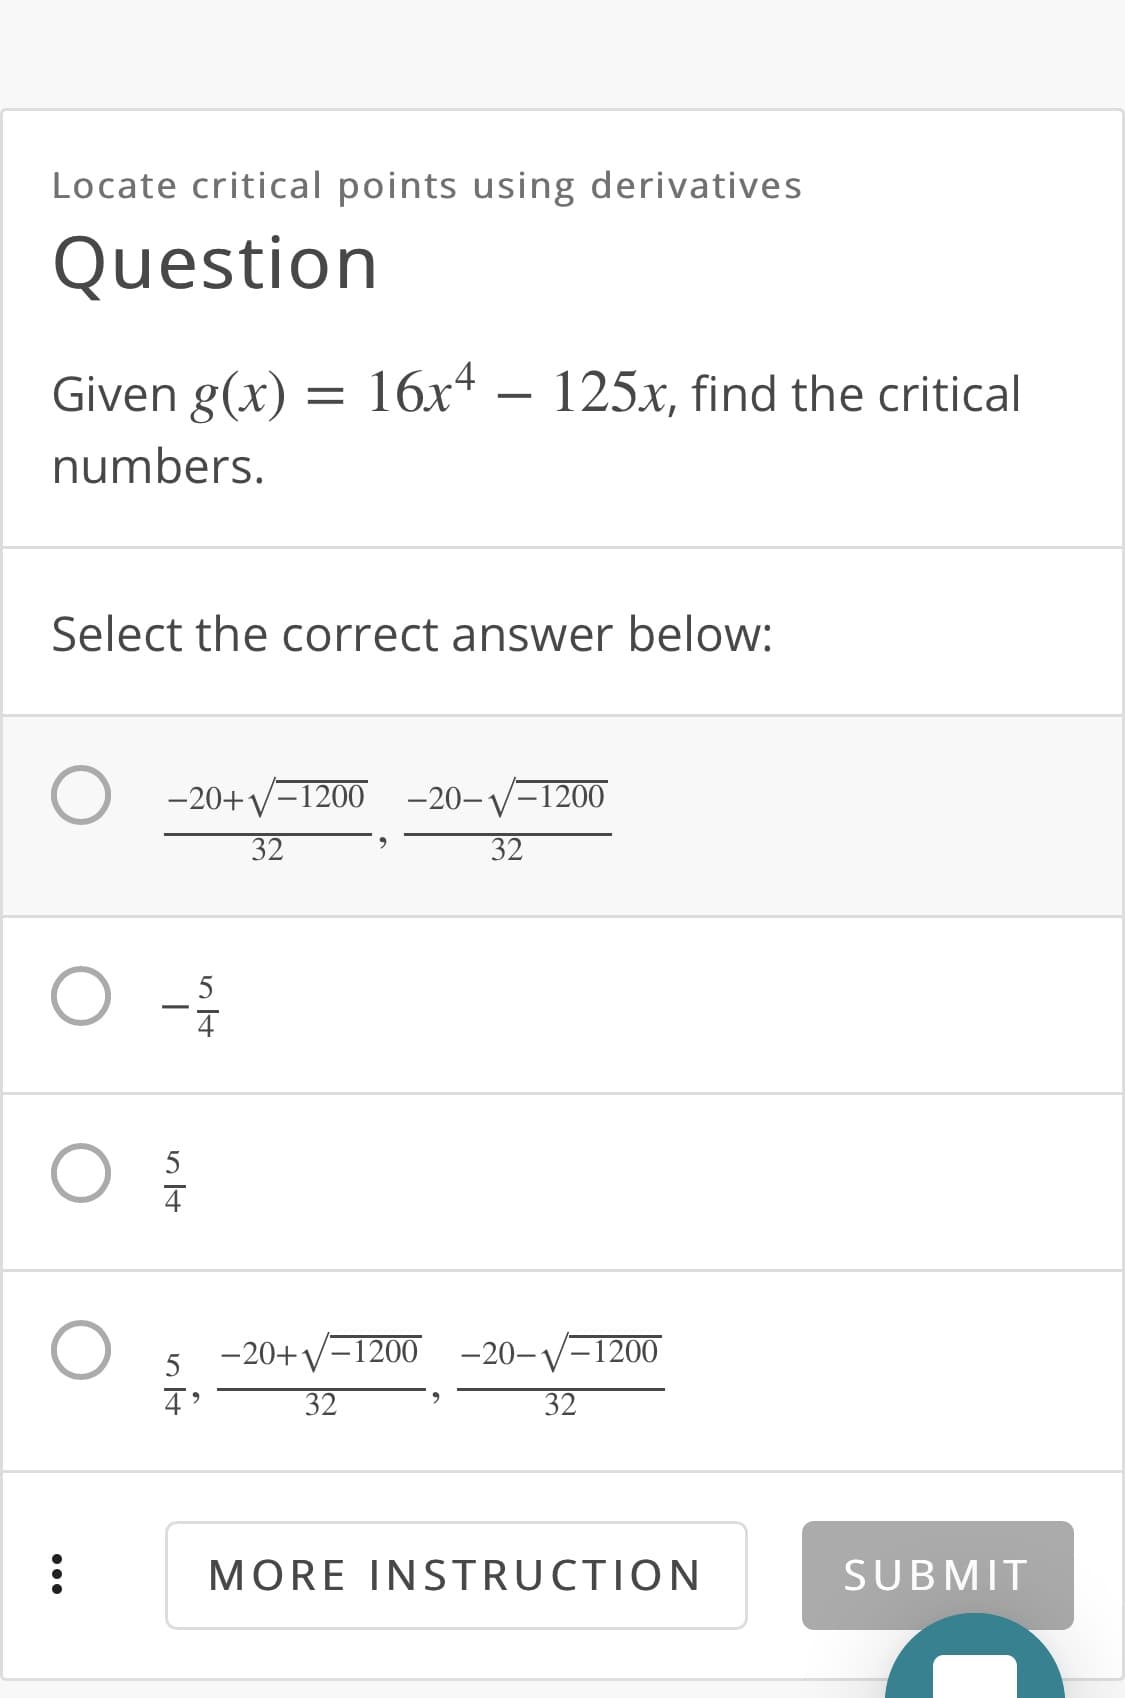 Locate critical points using derivatives
Question
Given g(x) = 16x4 – 125x, find the critical
numbers.
Select the correct answer below:
-20+y-1200 -20-V-1200
32
32
5
5
-20+V-1200 -20-V-1200
5
32
32
MORE INSTRUCTION
SUBMIT
